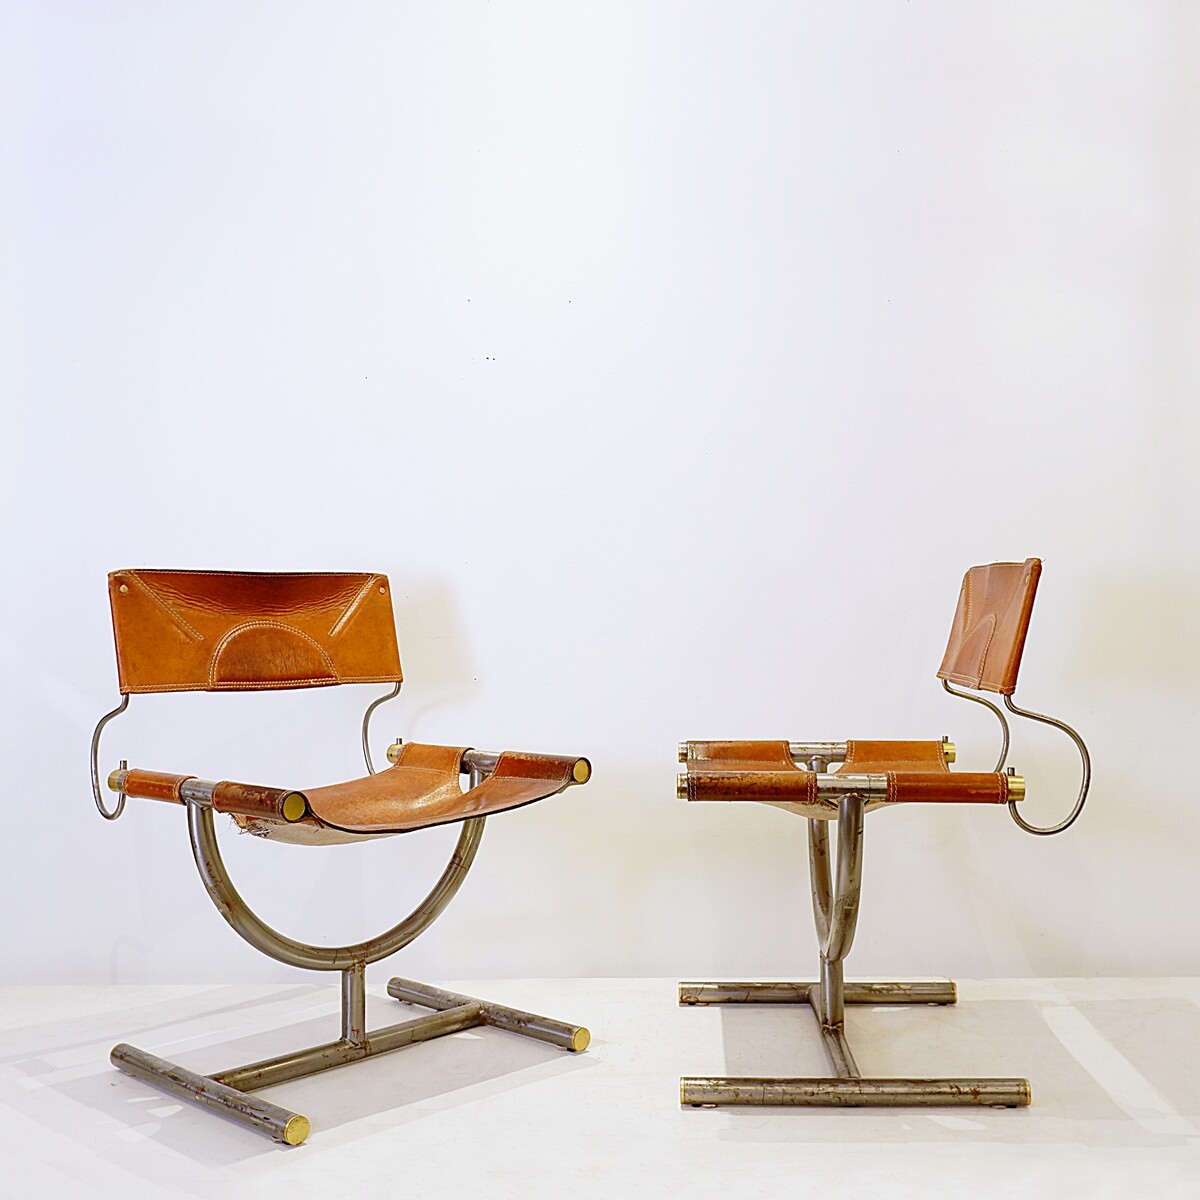 Afra & Tobia Scarpa for Benetton Headquarter Chairs, 1985, 1available